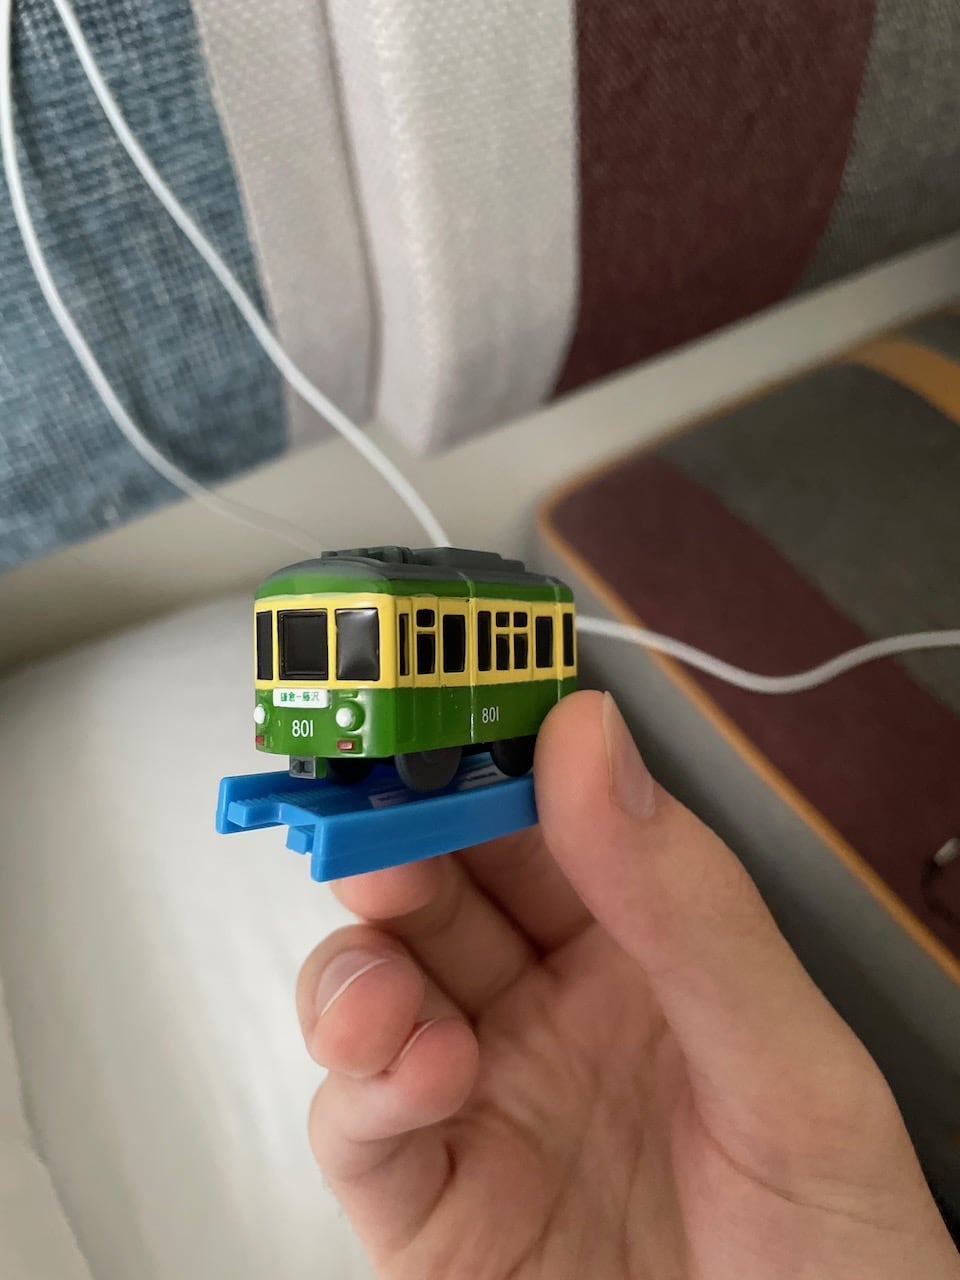 my enoden model I got out of a gacha machine